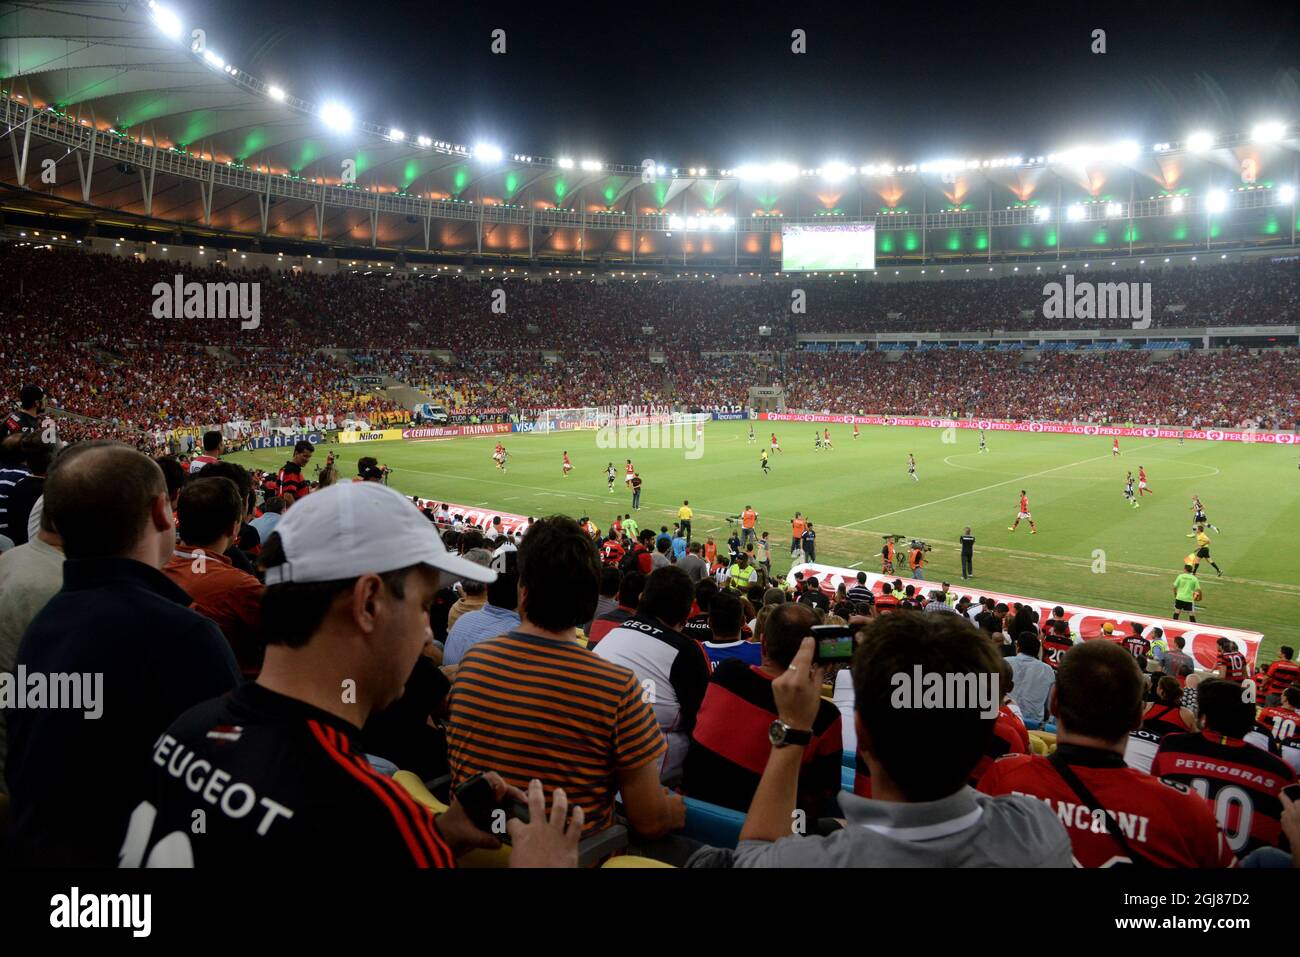 RIO DE JANEIRO 2013-10-22 * For your files* Spectators look at a soccer match in the Maracana stadium in Rio de Janeiro, October 22, 2013. The newly renovated stadium can take 80 000 spectators and will host both the final of the 2014 World Soccer Championships and the opening ceremony of the 2016 Summer Olympics. Foto:Tobias Rostlund / TT / kod 1014  Stock Photo